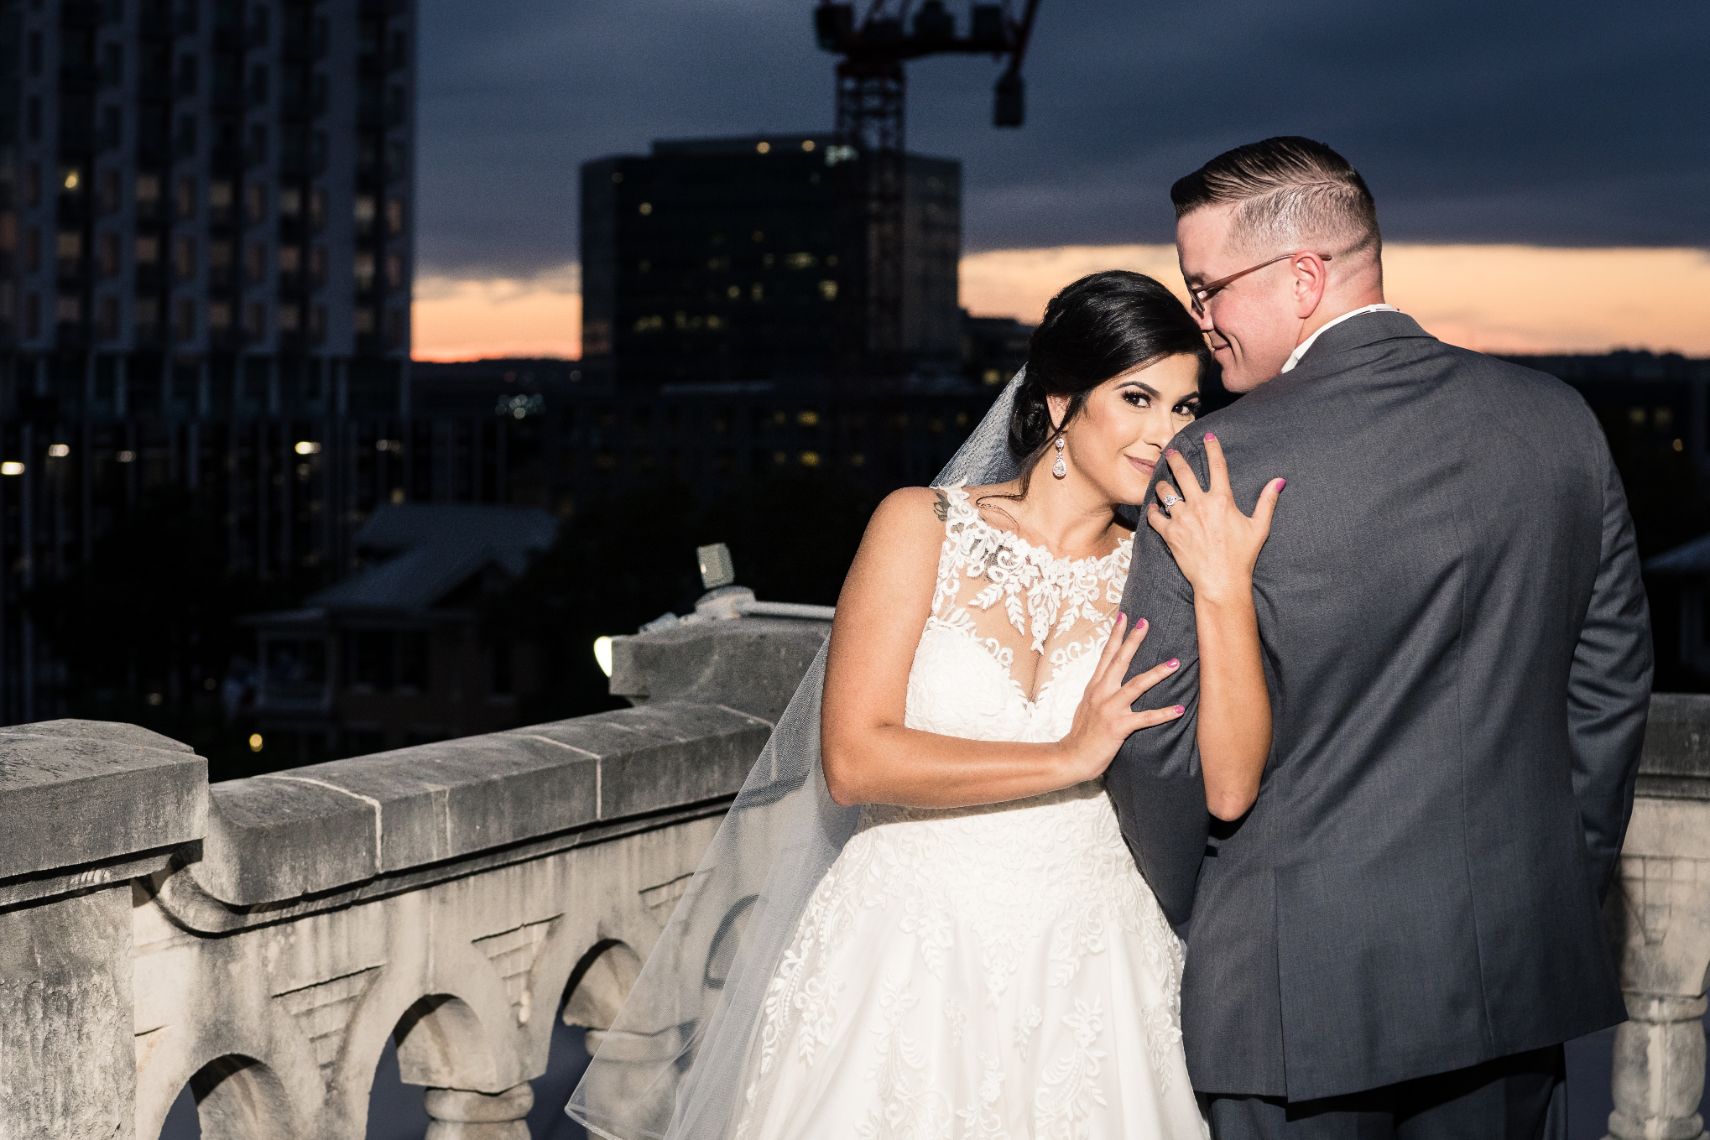 The bride is holding onto the arm of the groom. The couple is standing on a stone porch, the Austin downtown skyline is in the background.